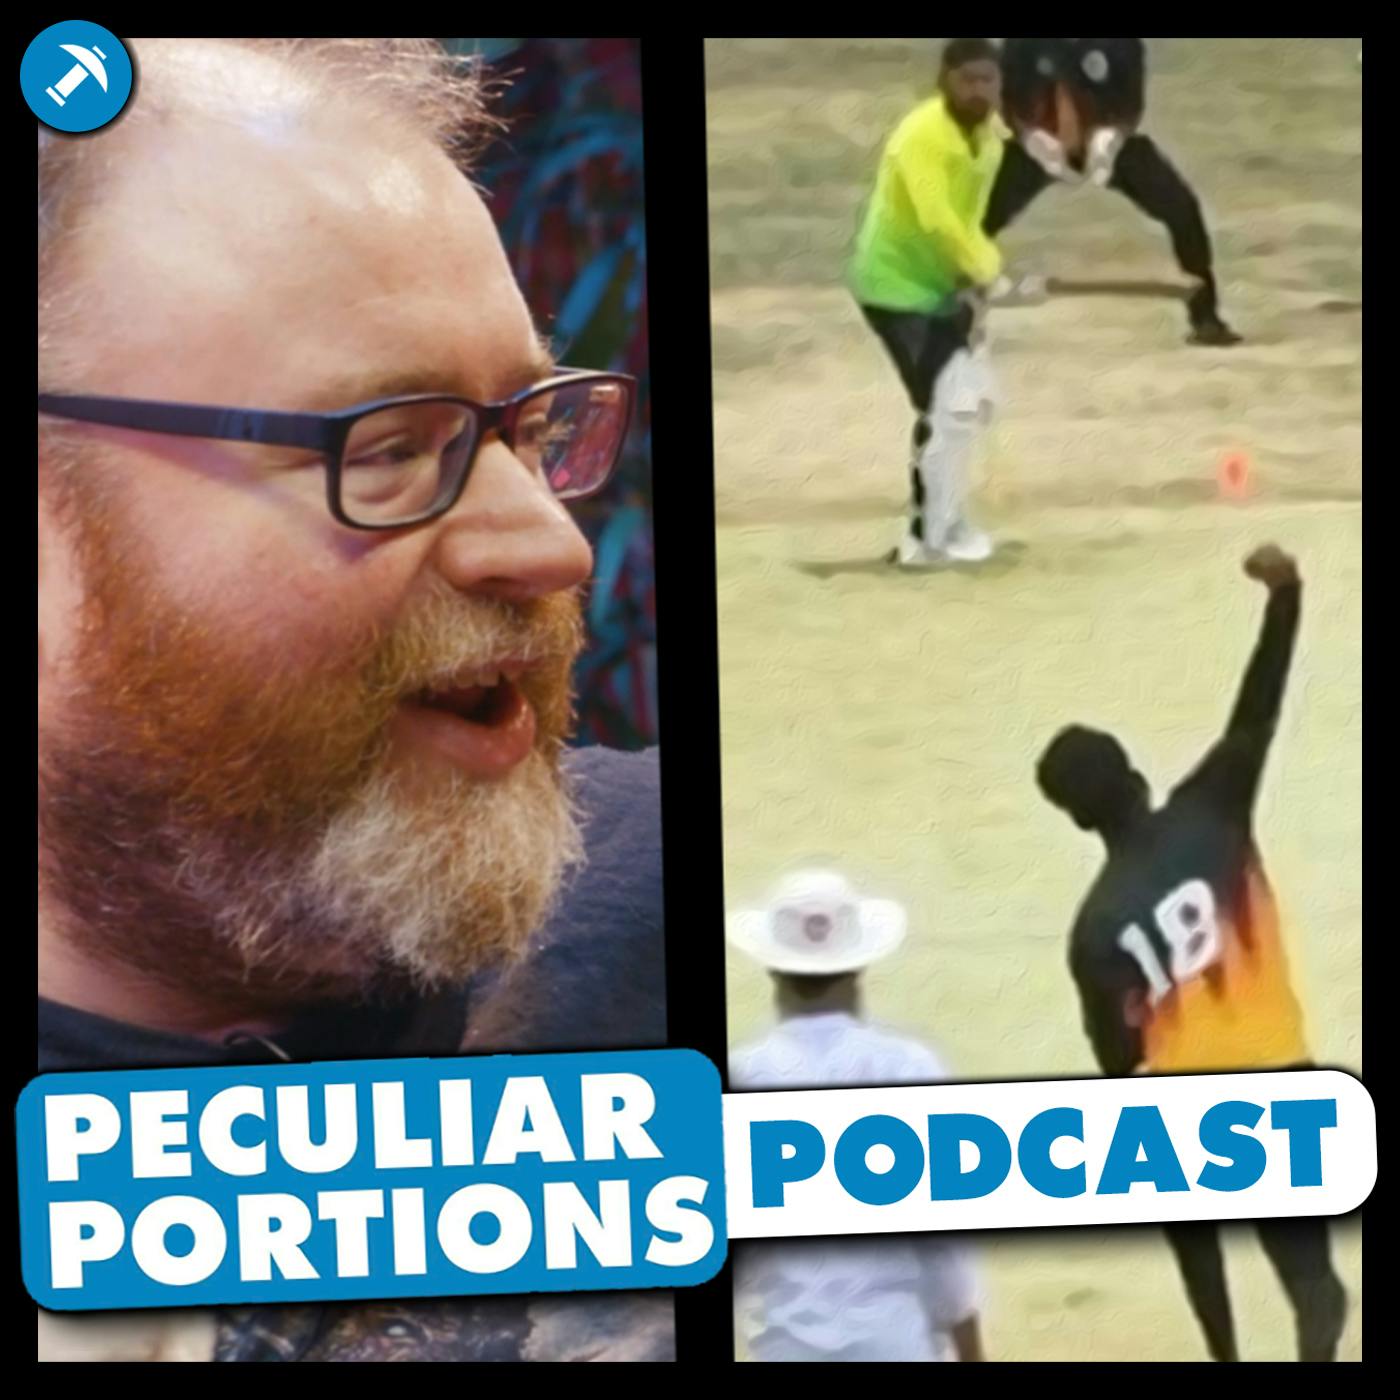 Indian farmers stream fake cricket match to Russian betters - Peculiar Portions Podcast #66